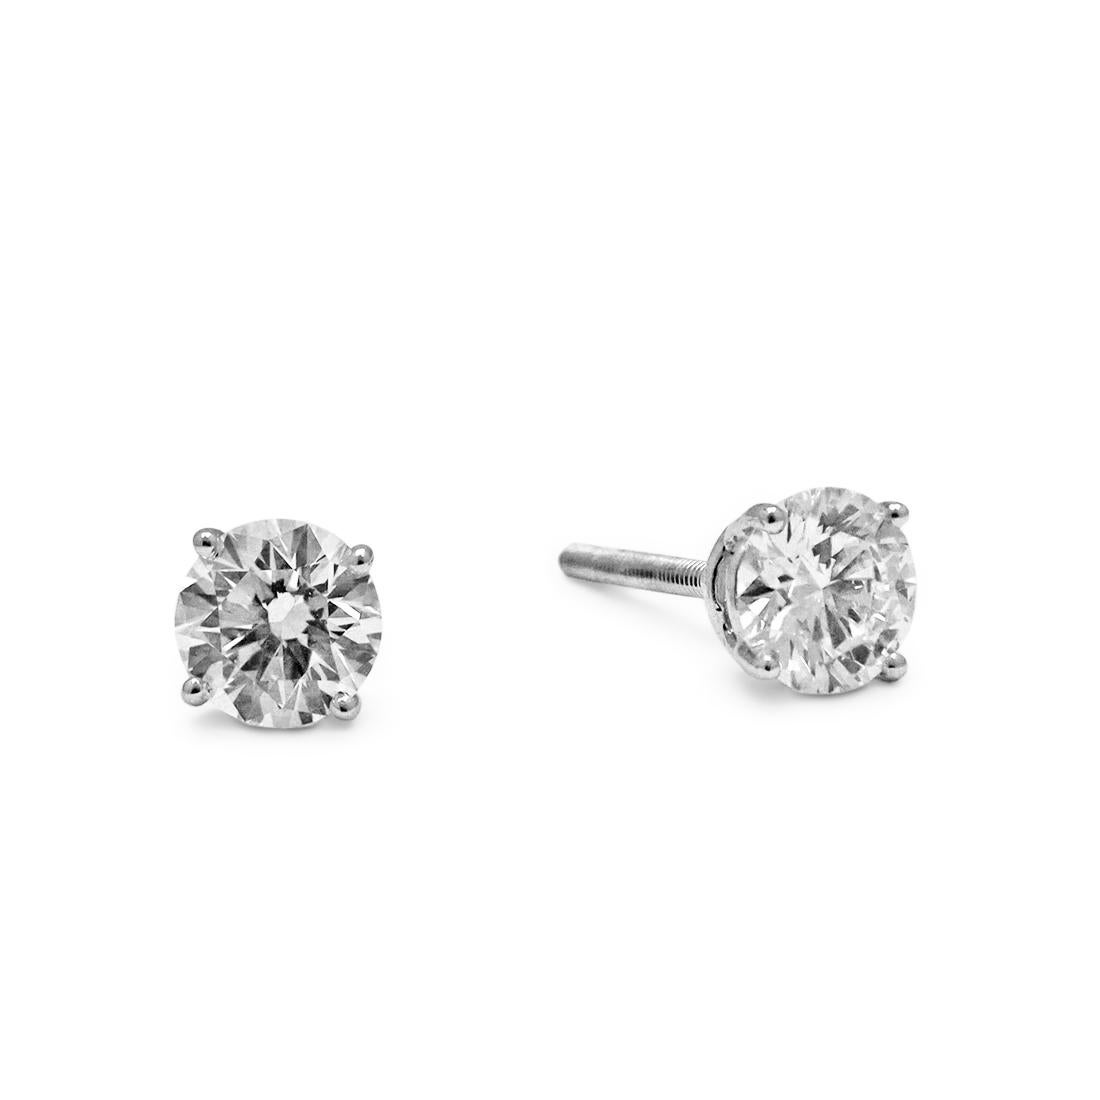 Authentic Tiffany & Co. stud earrings crafted in platinum and set with stunning round brilliant cut diamonds, weighing 2.24 carats total weight. The earrings have screw backs for pierced ears. Signed T&Co., PT950. Each earring is presented with its